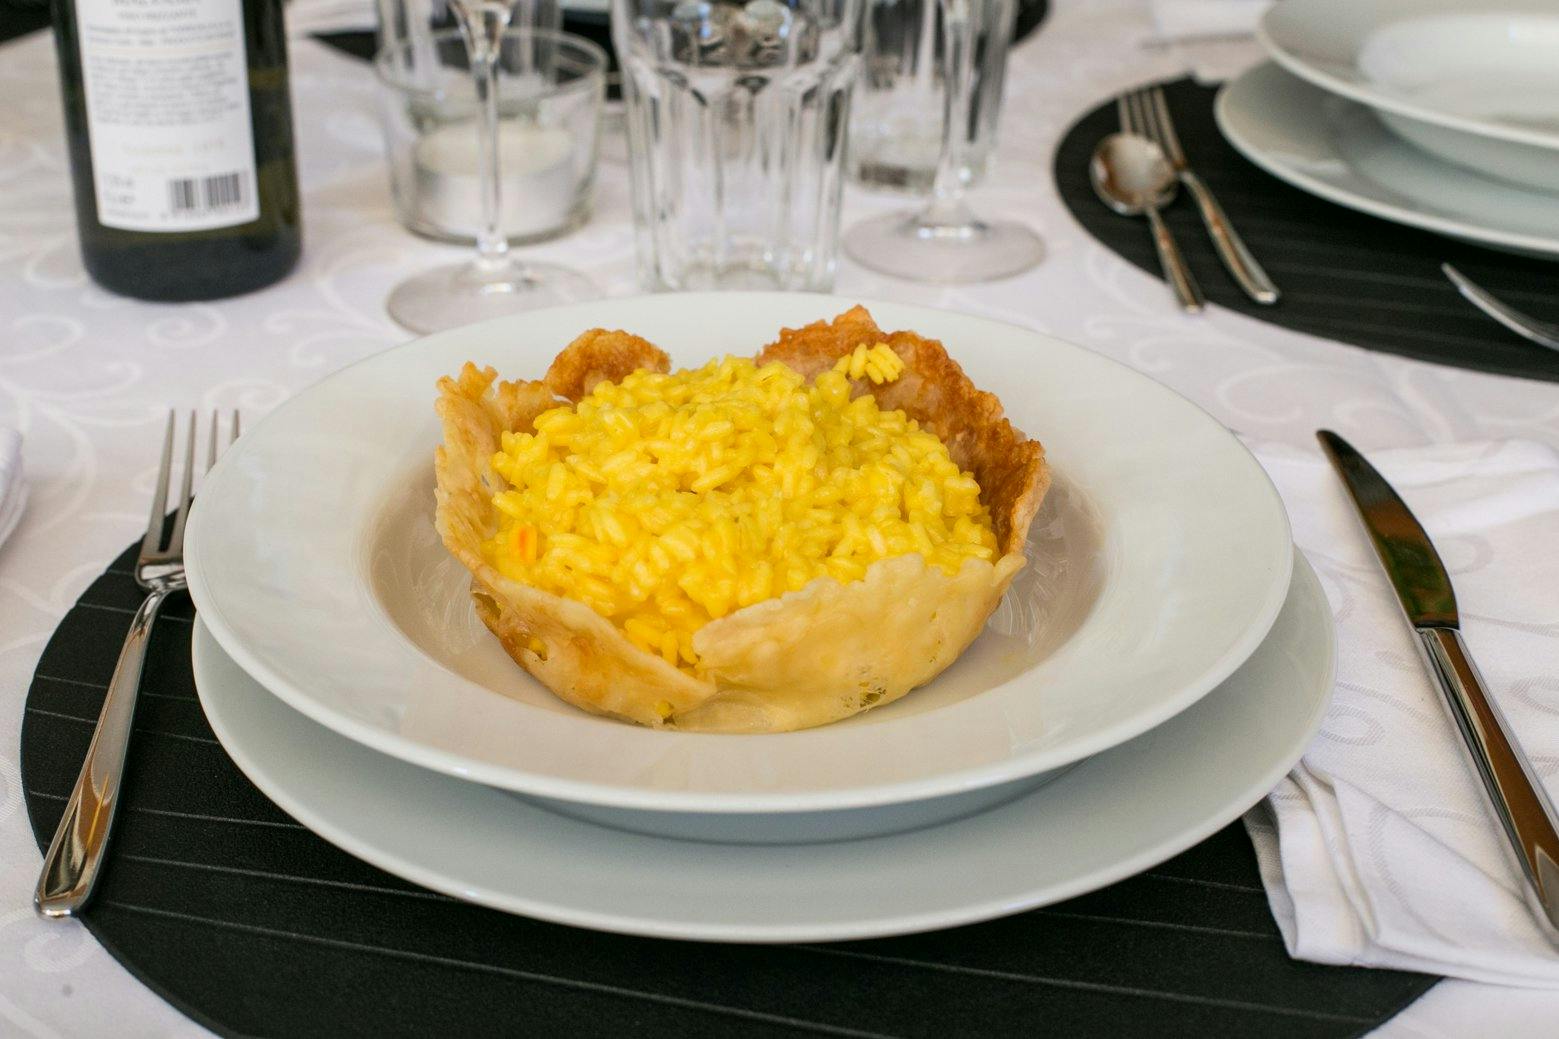 Milanese risotto served in a Parmesan cheese basket